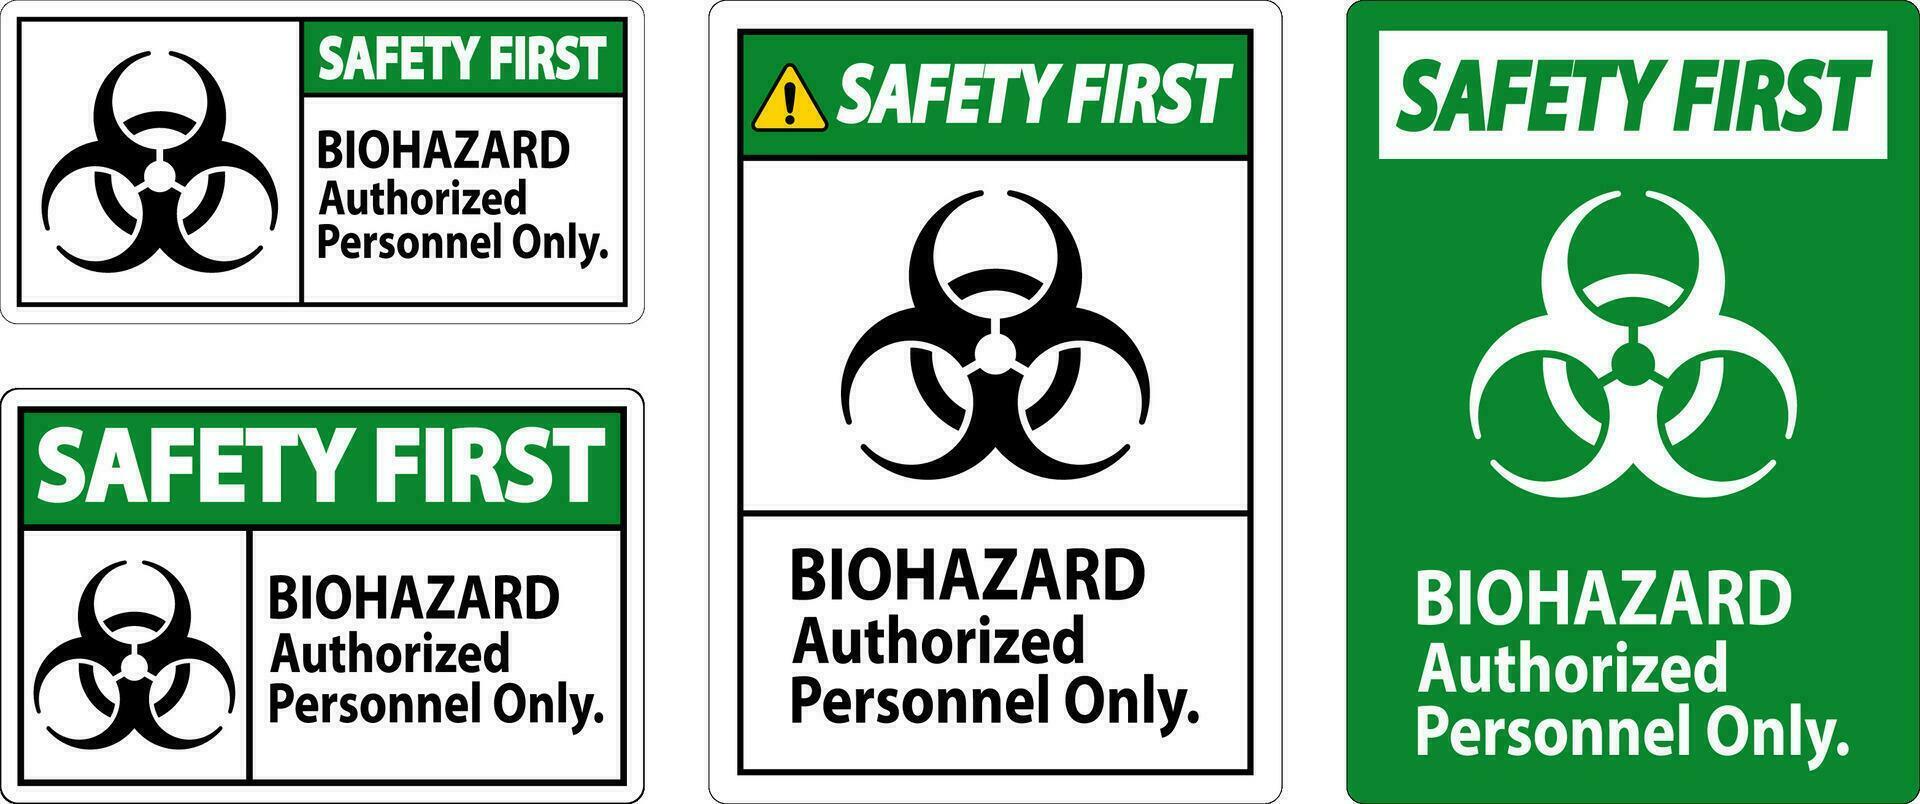 Safety First Label Biohazard Authorized Personnel Only vector